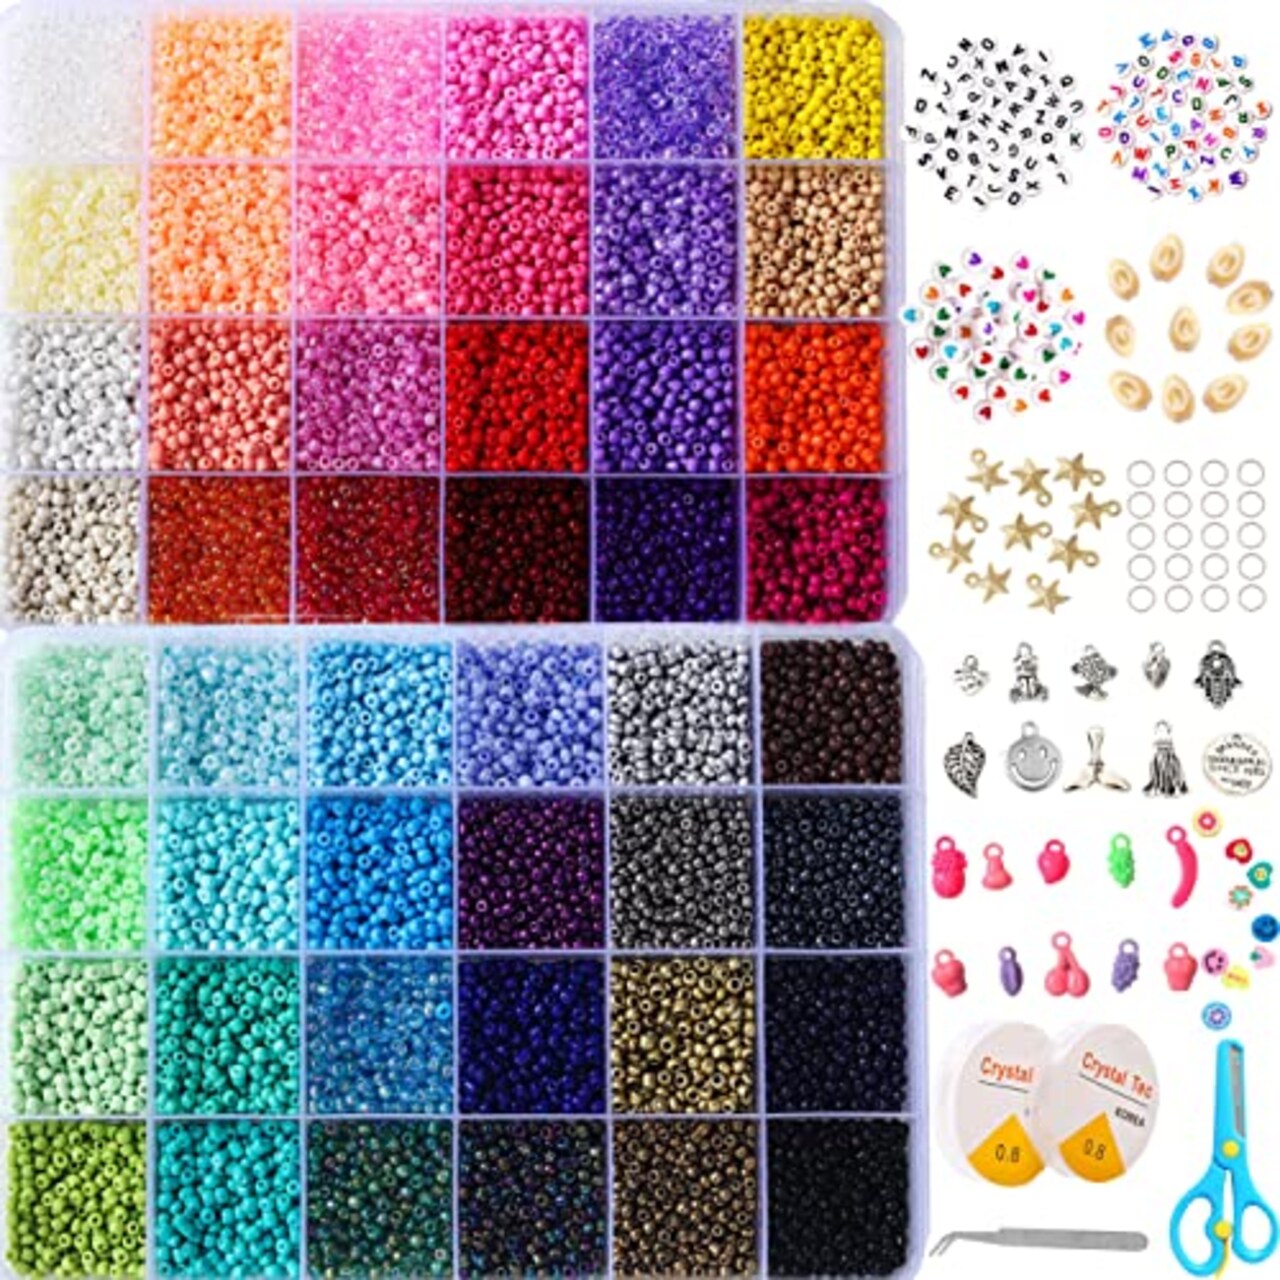 YITOHOP 8800+pcs 4mm 12/0 48 Colors Glass Seed Beads, Charms